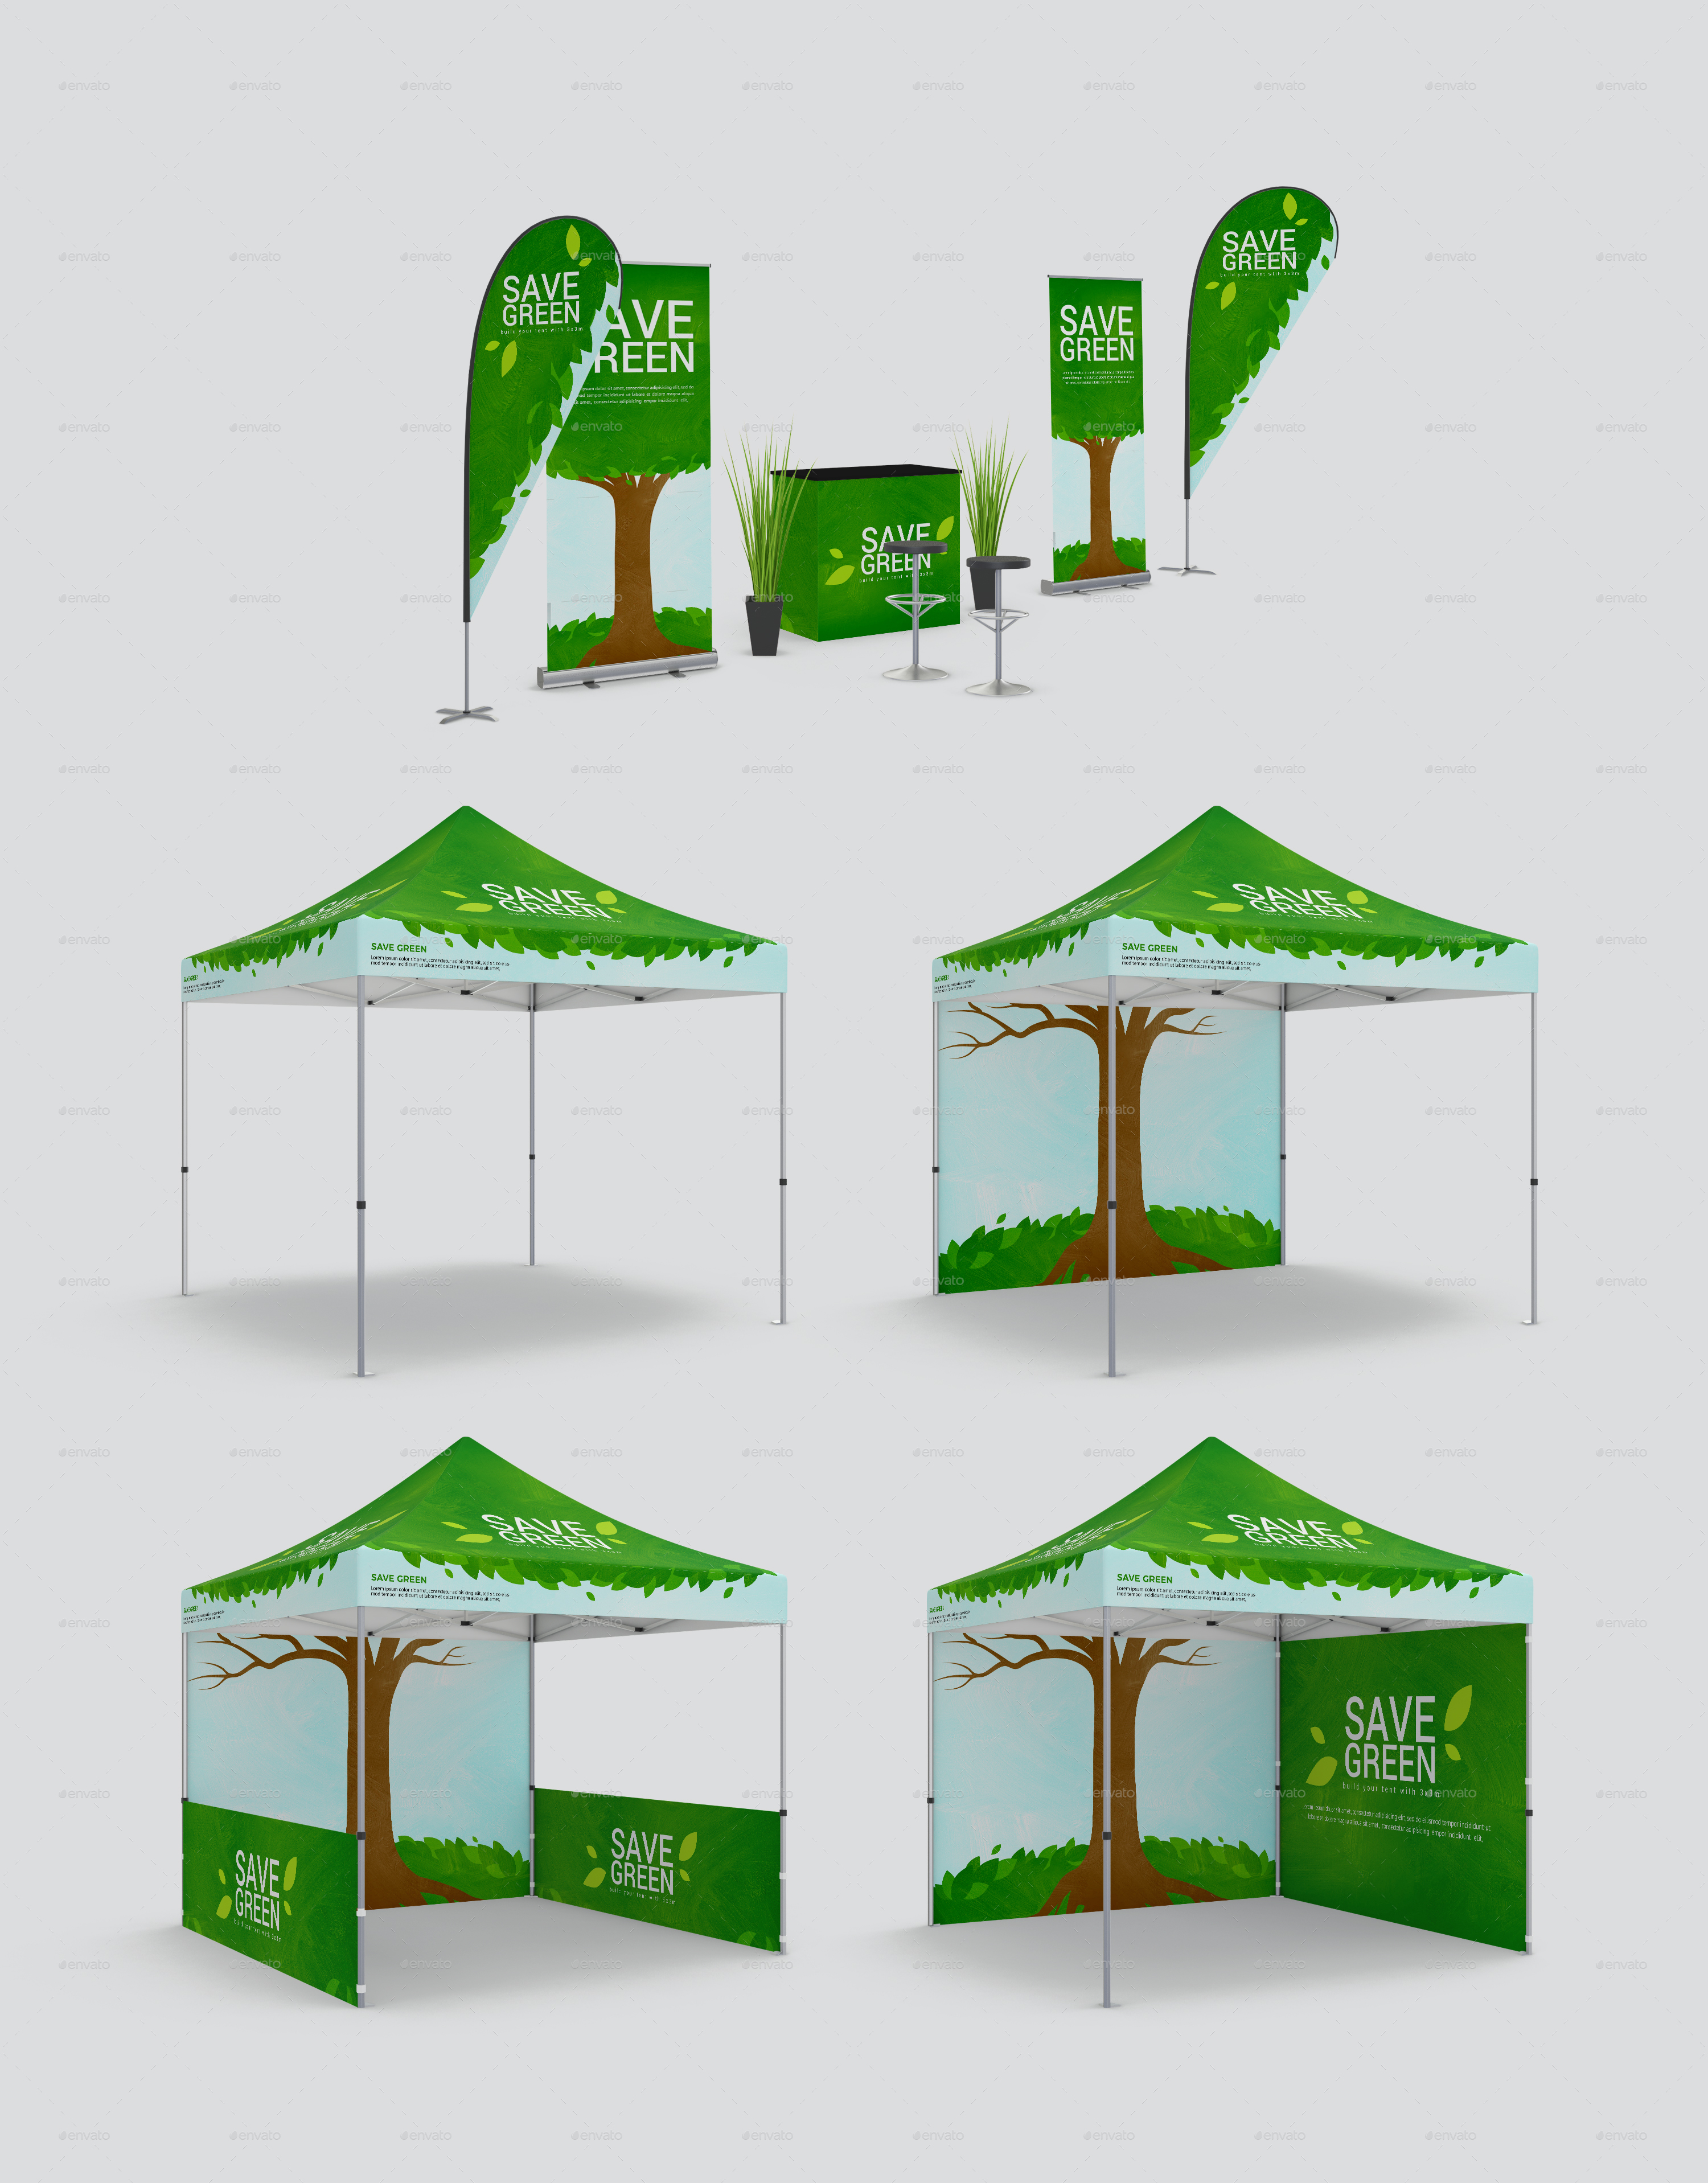 Download Tent Gazebo / Event Stand Canopy Mockup / Trade Show Mockup by docqueen